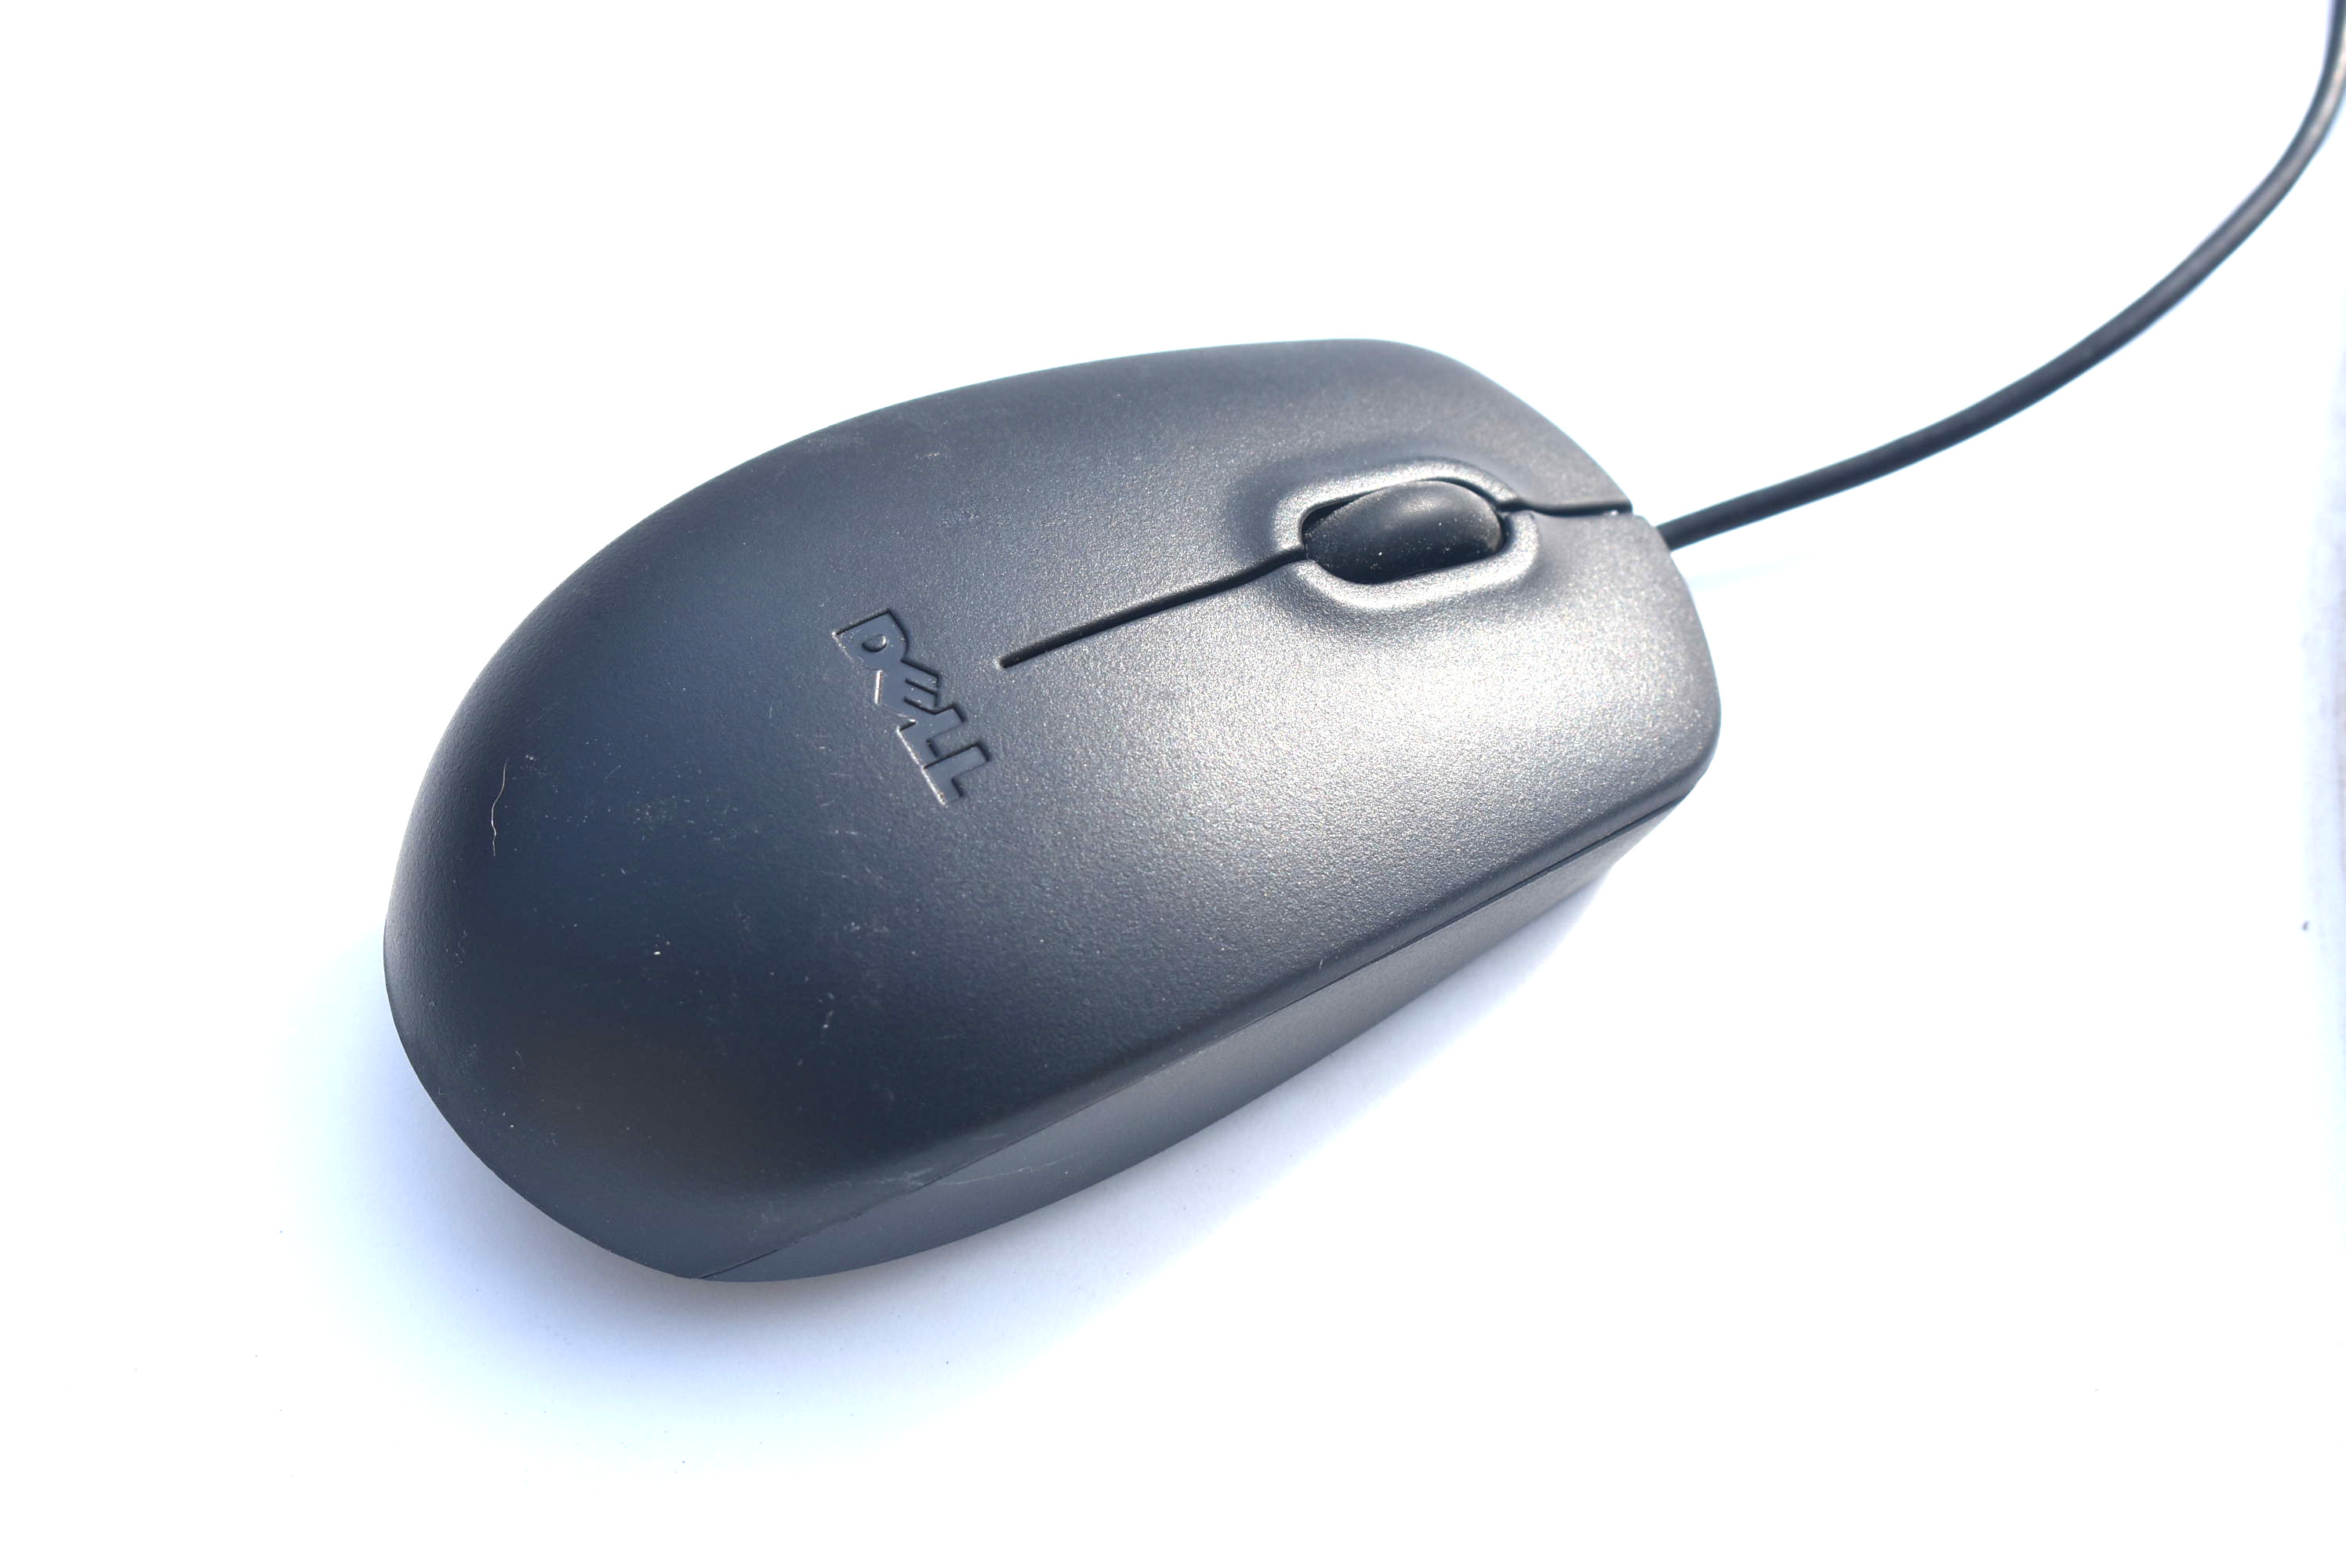 The Correct USB Optical Mouse to build Dell USB Keyboard Combo